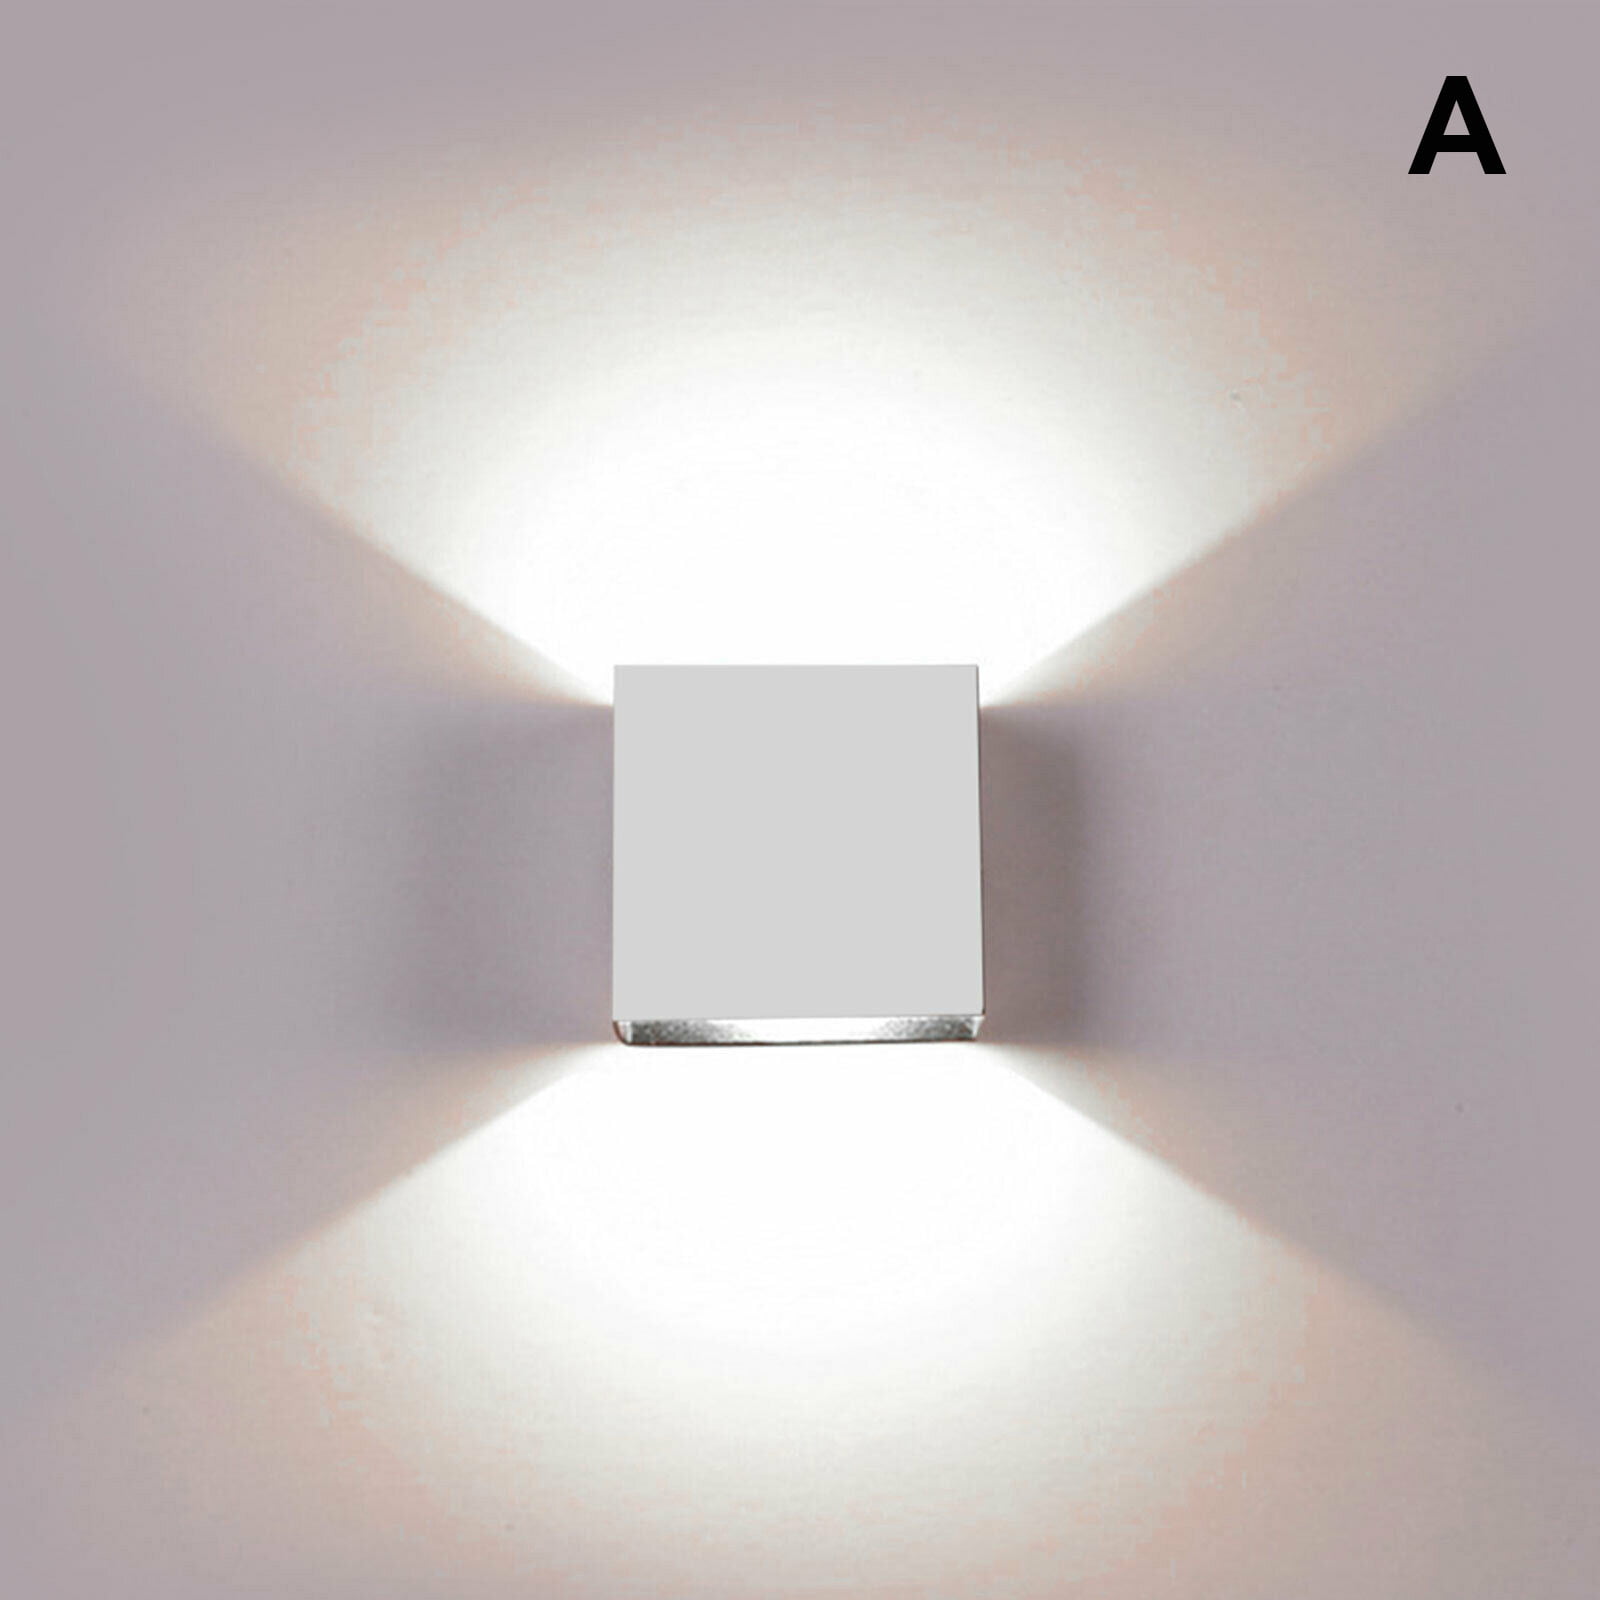 6W Modern LED Wall Lamp Up Down Indoor Sconce Lighting Home Decor Fixture Light 